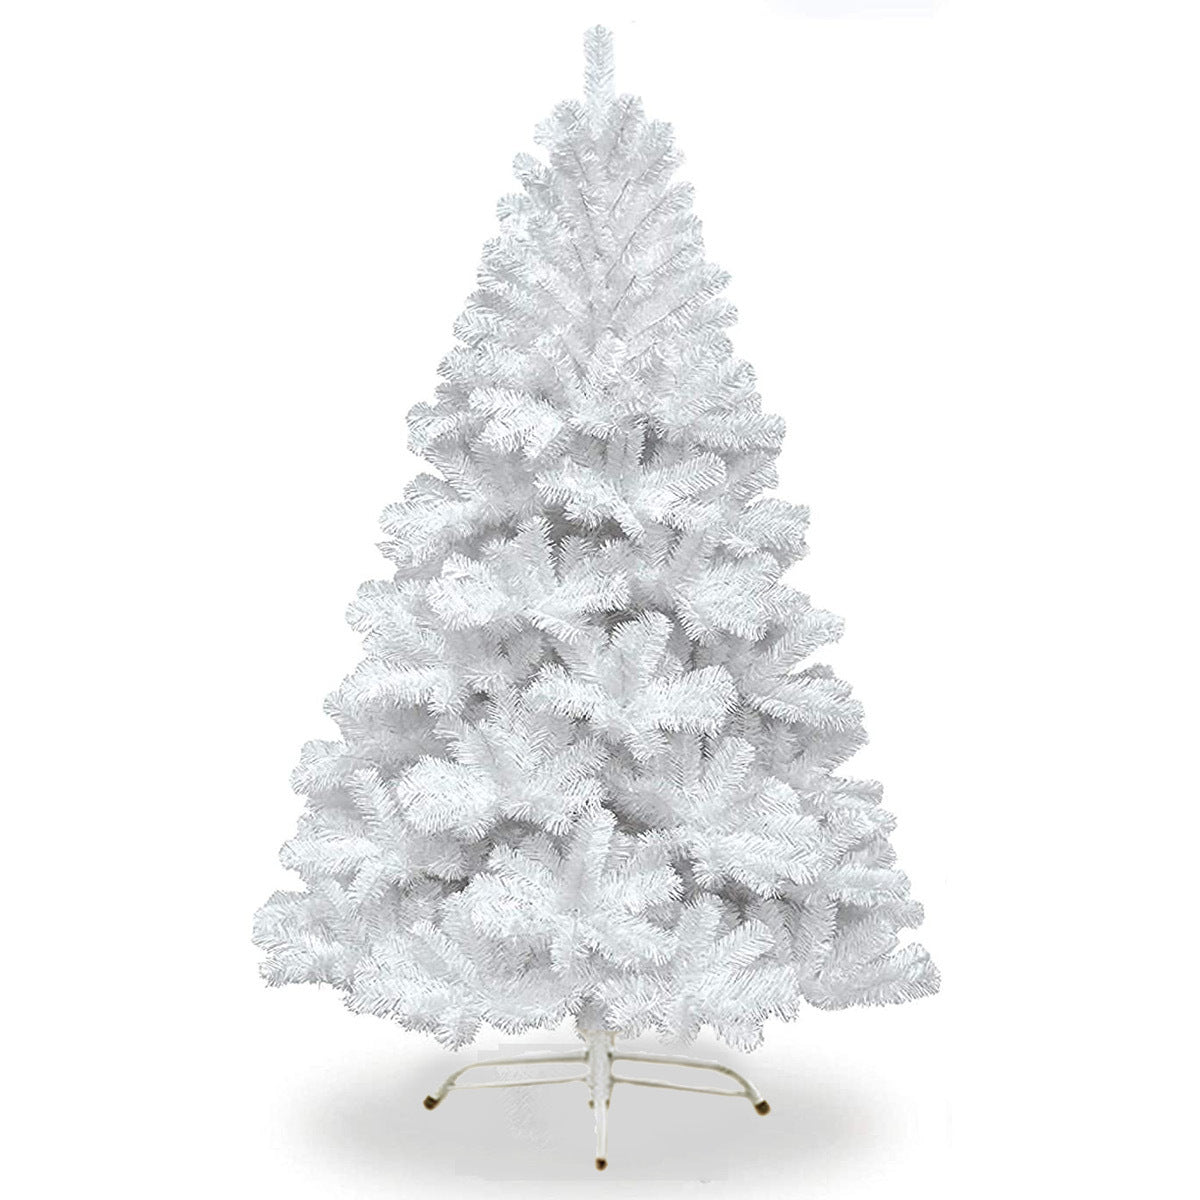 Christmas By Sas 1.8m White Pine Christmas Tree 550 Tips Full Figured Easy Assembly Deals499